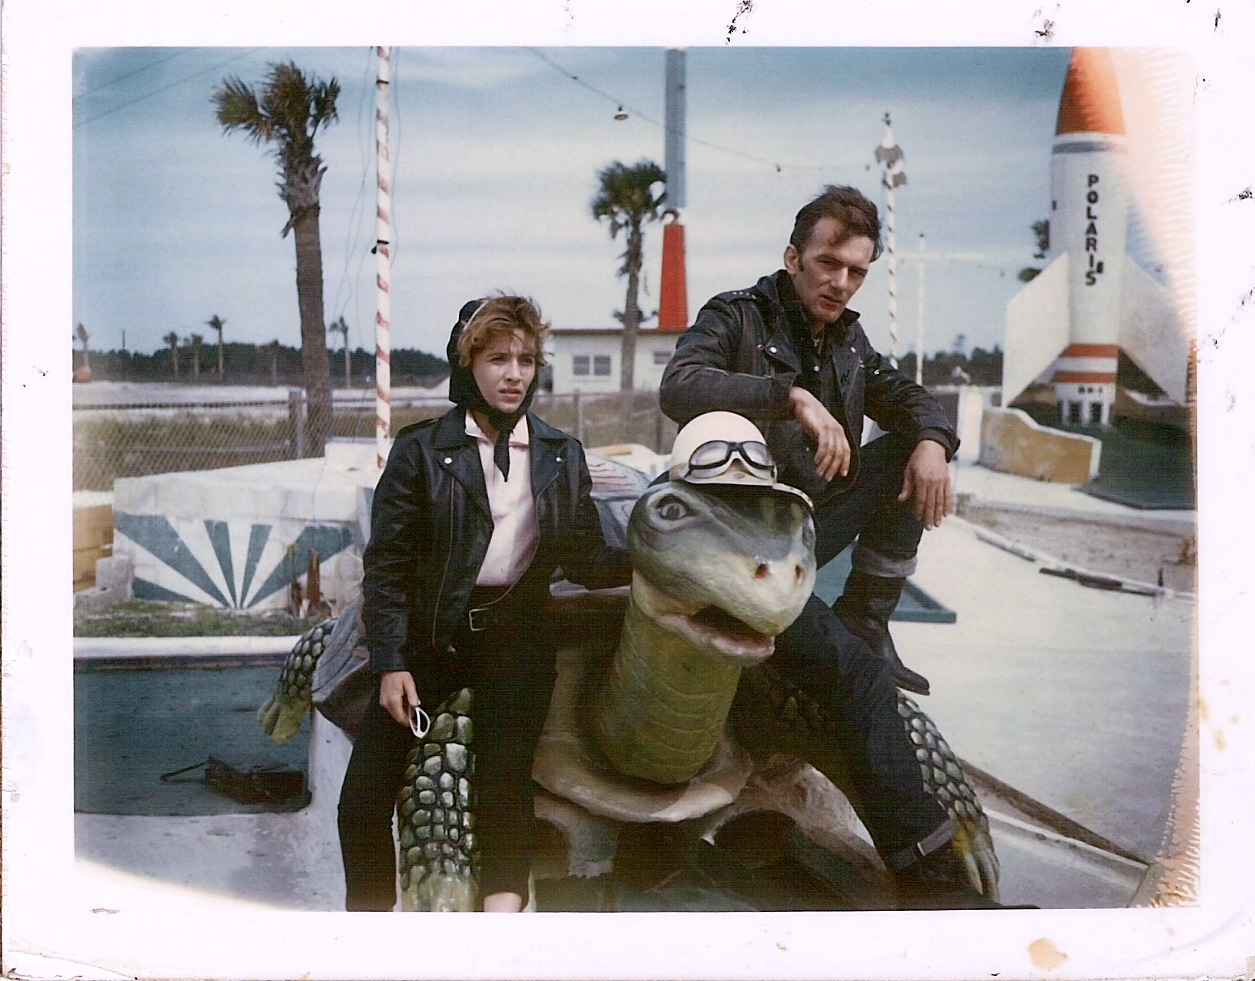 This photo is of my parents in 1963 on a Florida road trip. They are sitting on the back of a turtle in what looks to be a putt putt golf course. View full size.